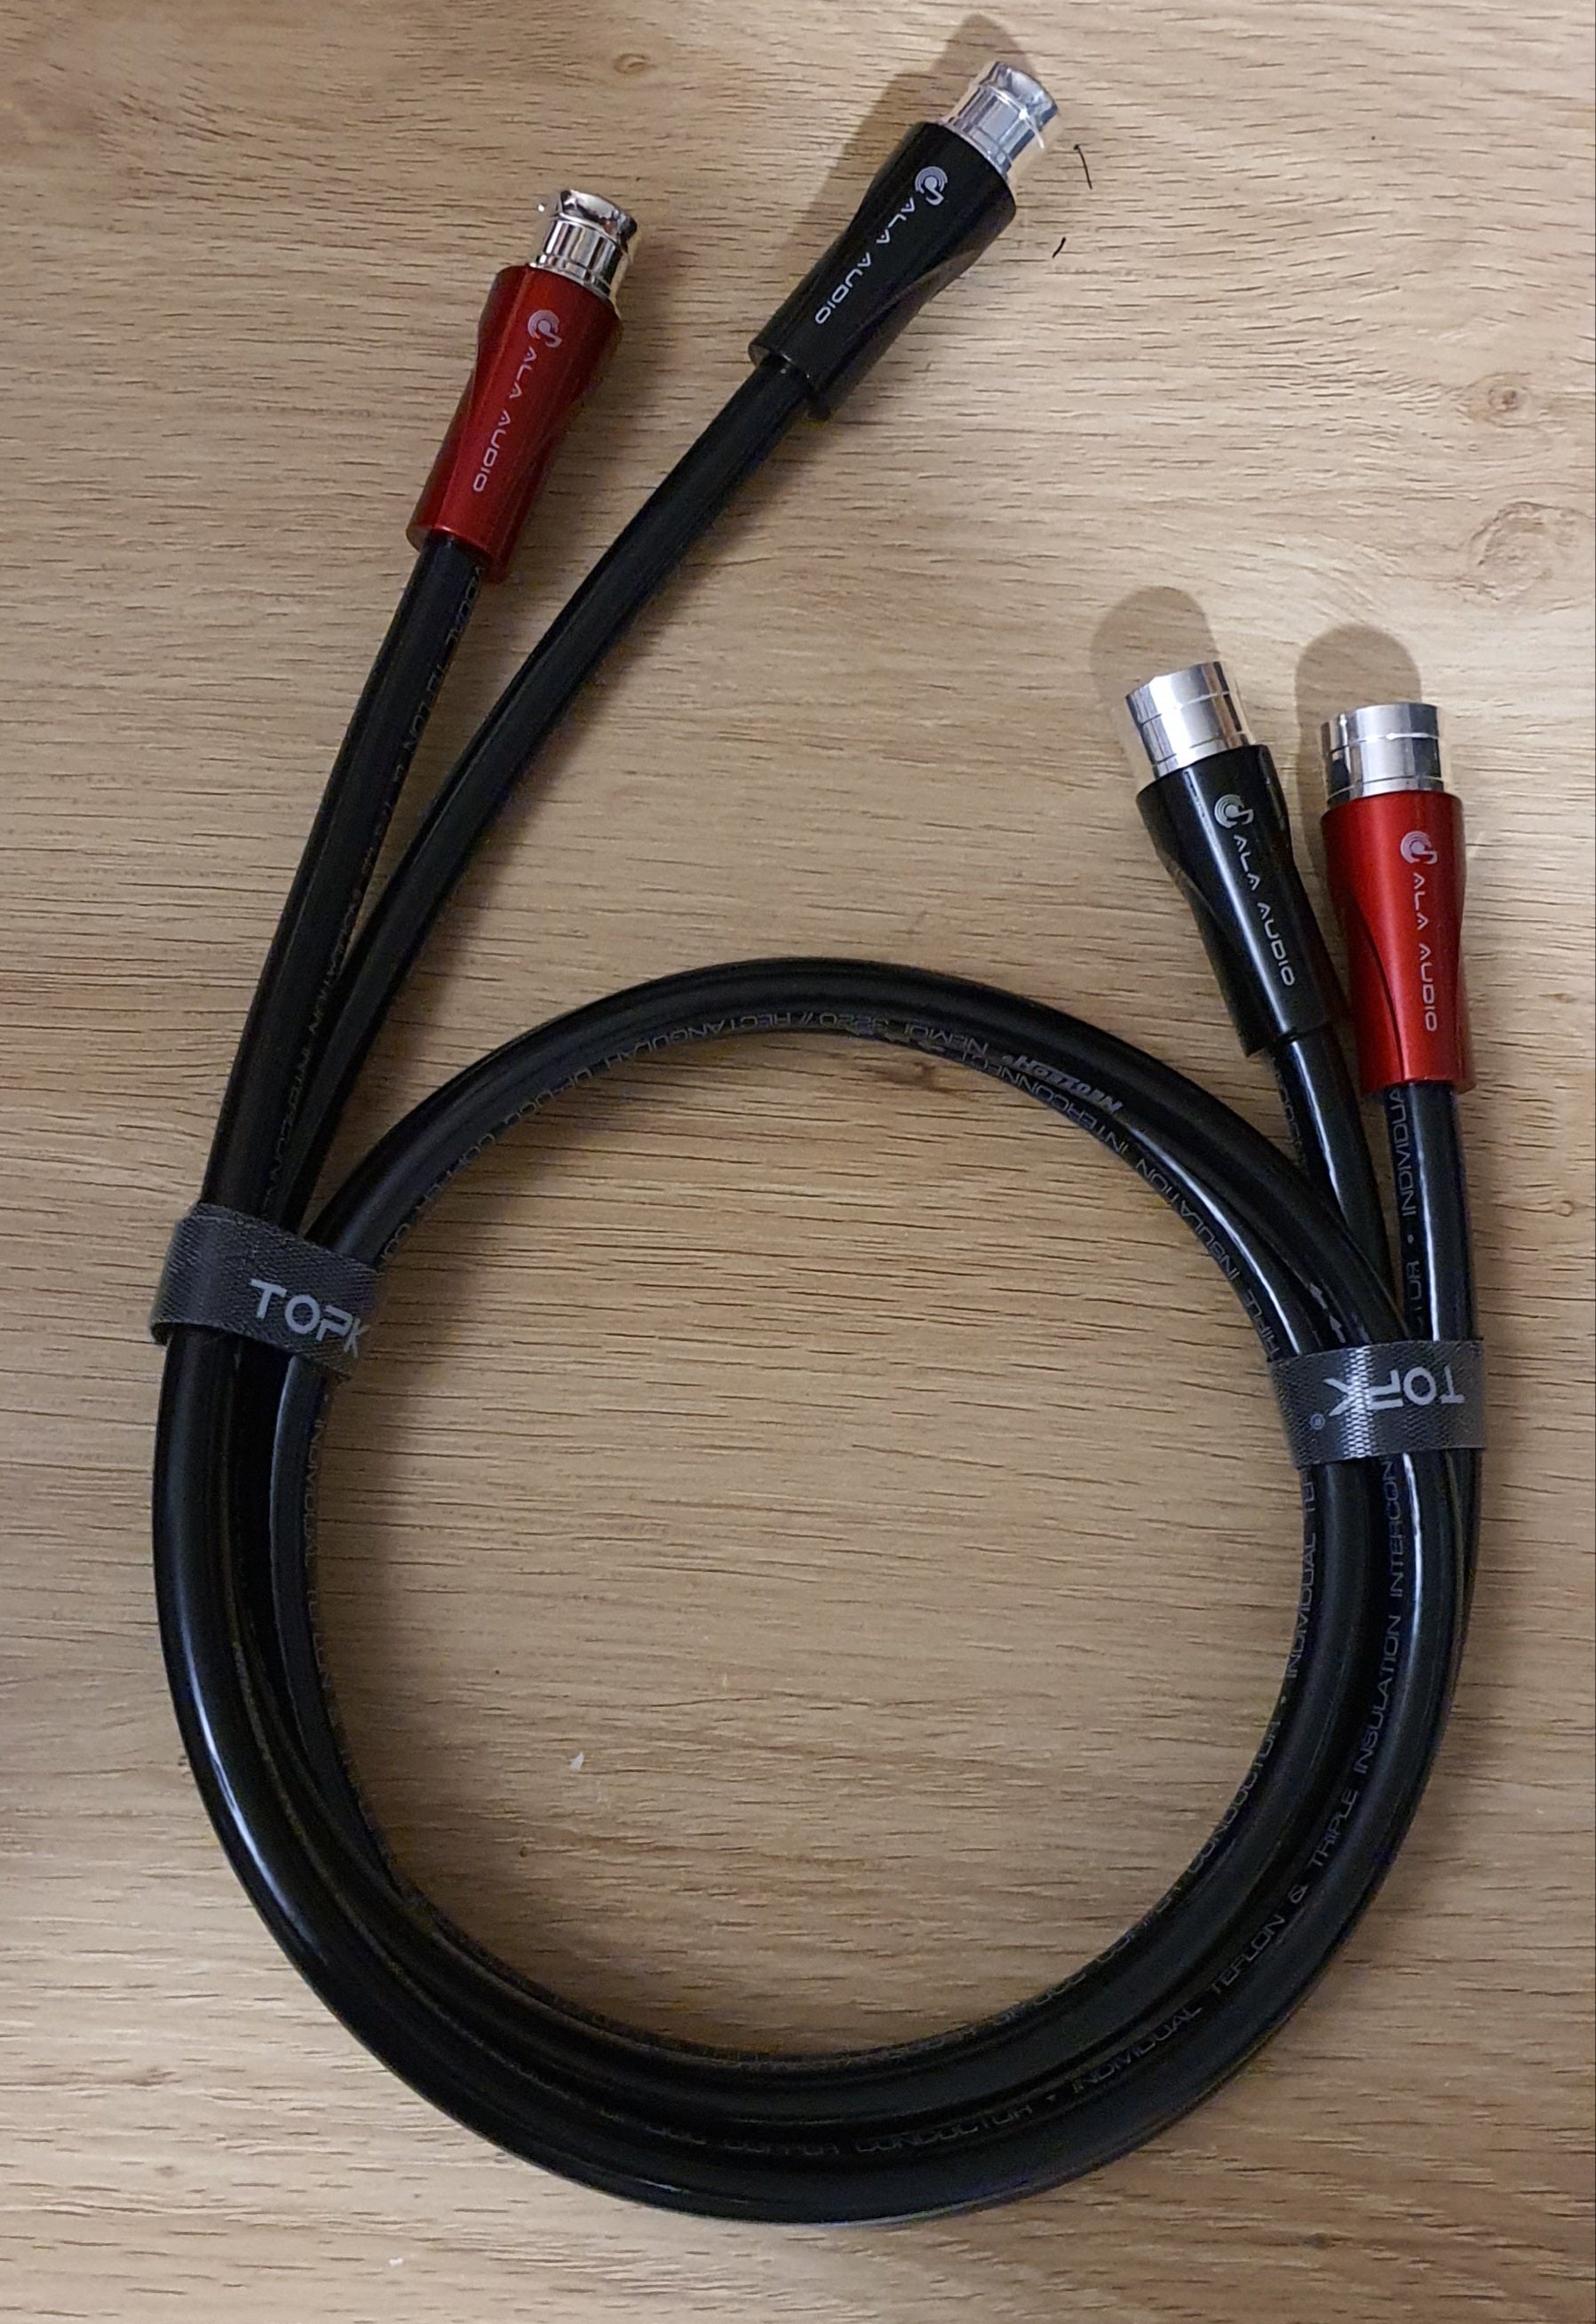 Neotech NEMOI-3220 Balanced XLR Interconnect Cable (Tuned Pair) - Audiophile Store